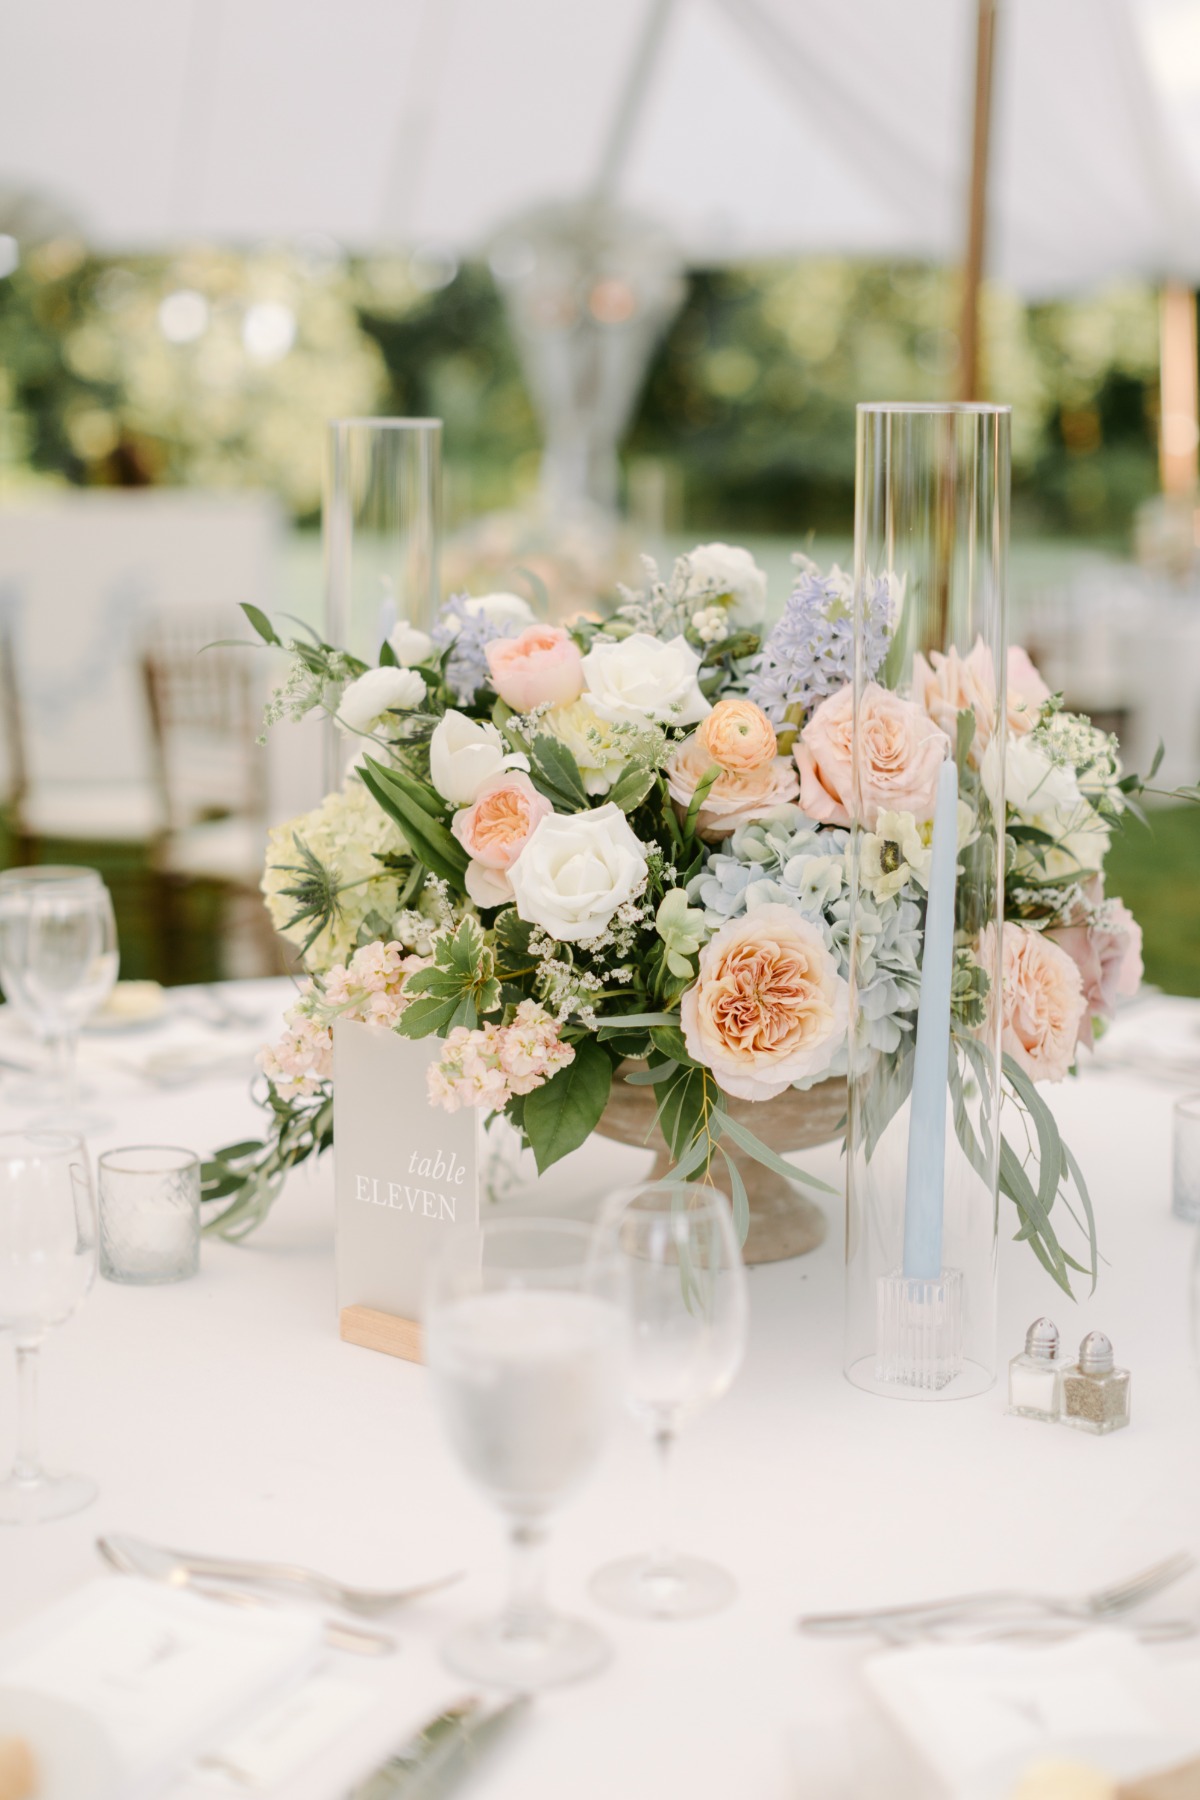 Reception table centerpiece with white, pink, and blue floral arrangements, table number, and candles